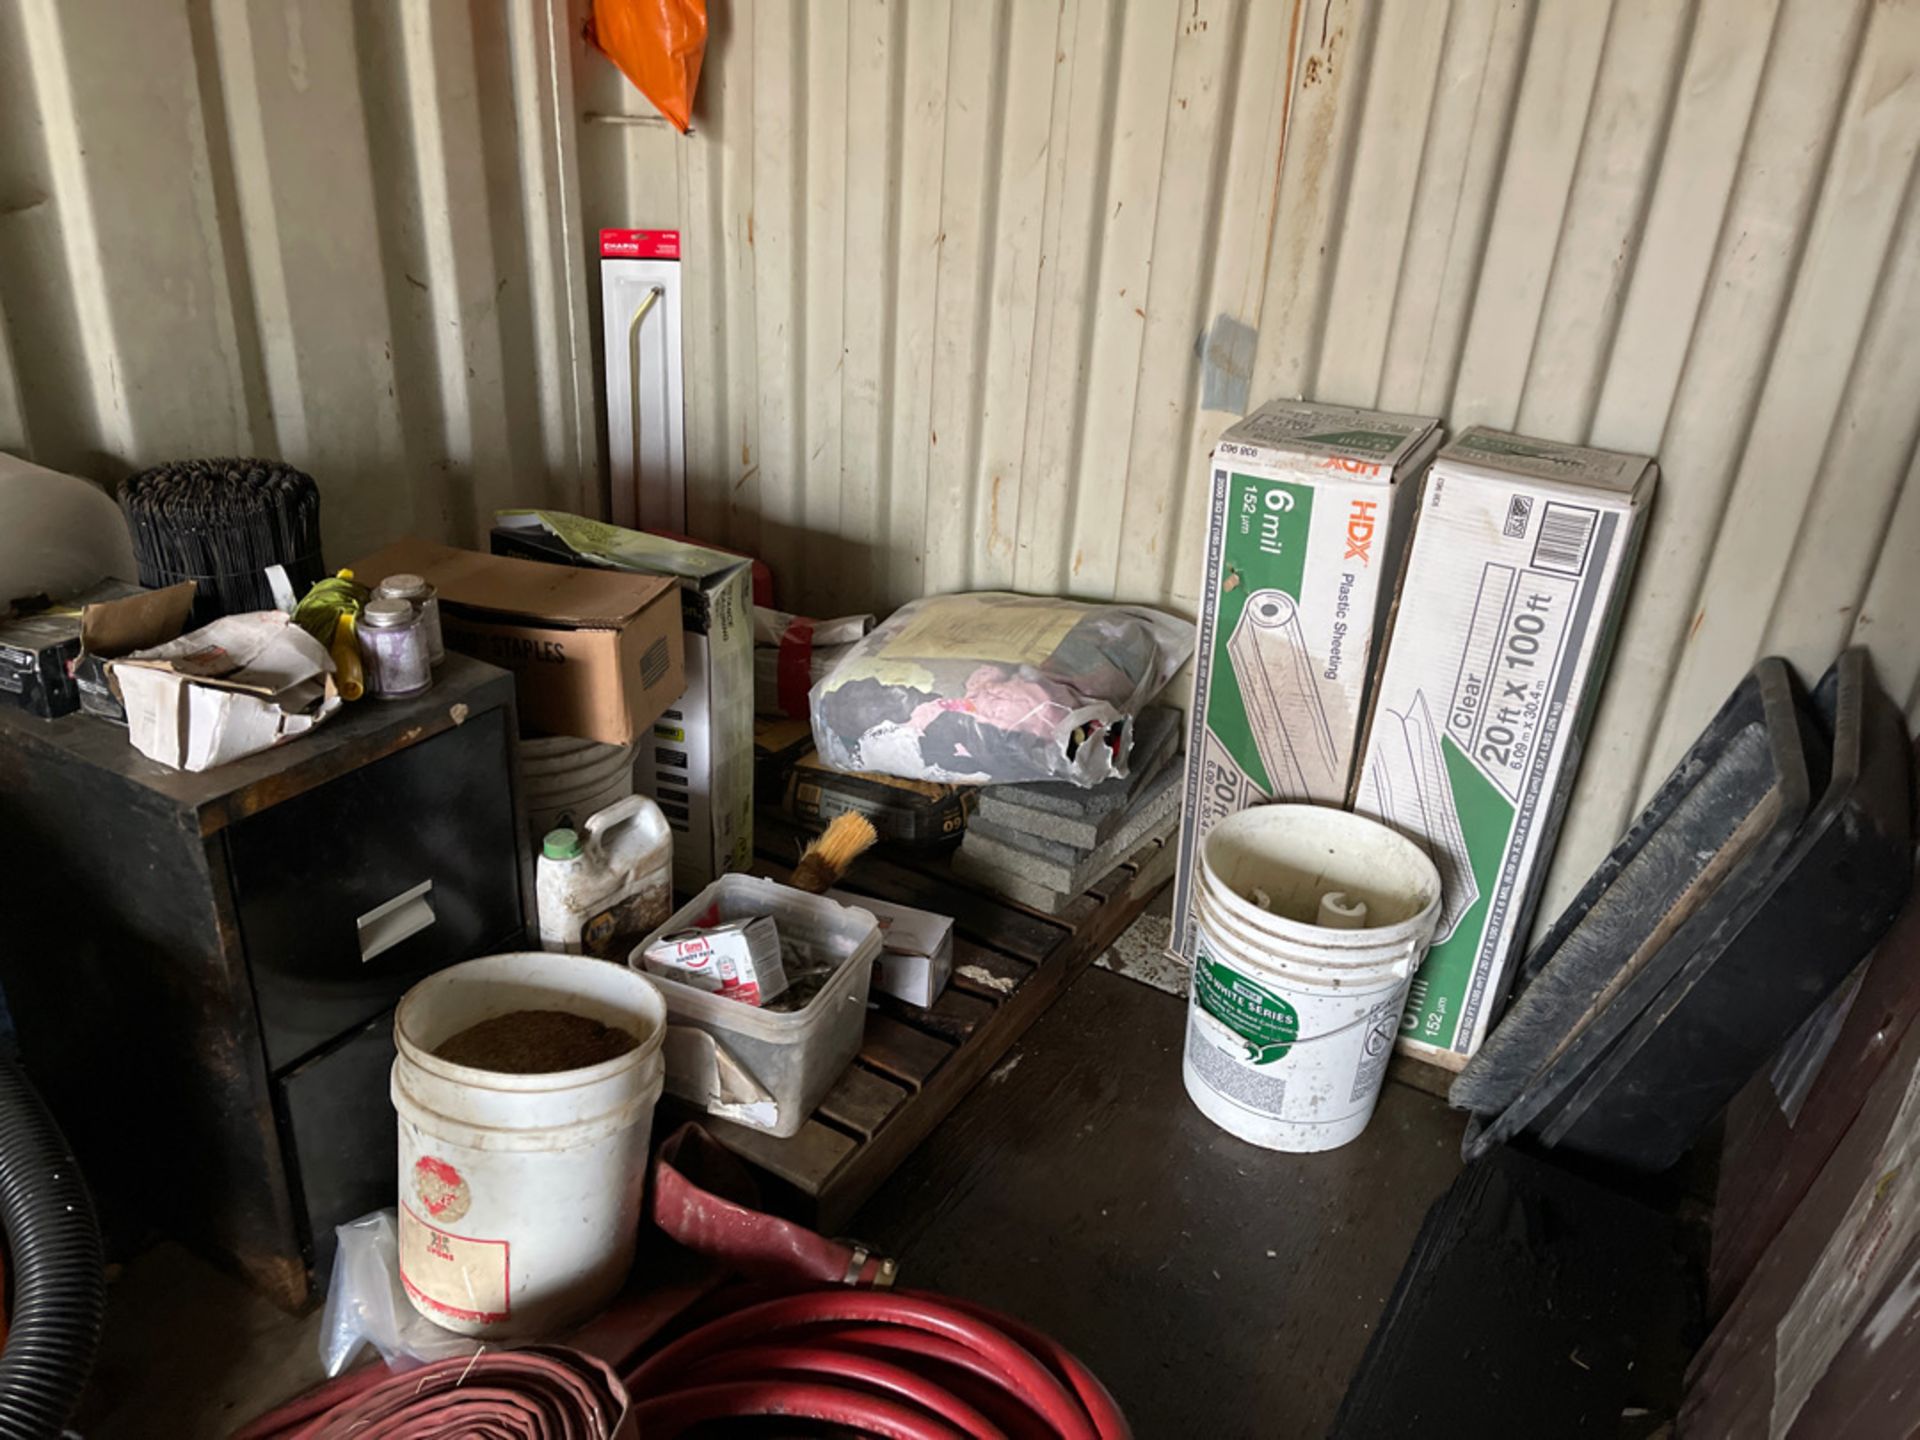 Contents of Shipping Container - Image 6 of 6